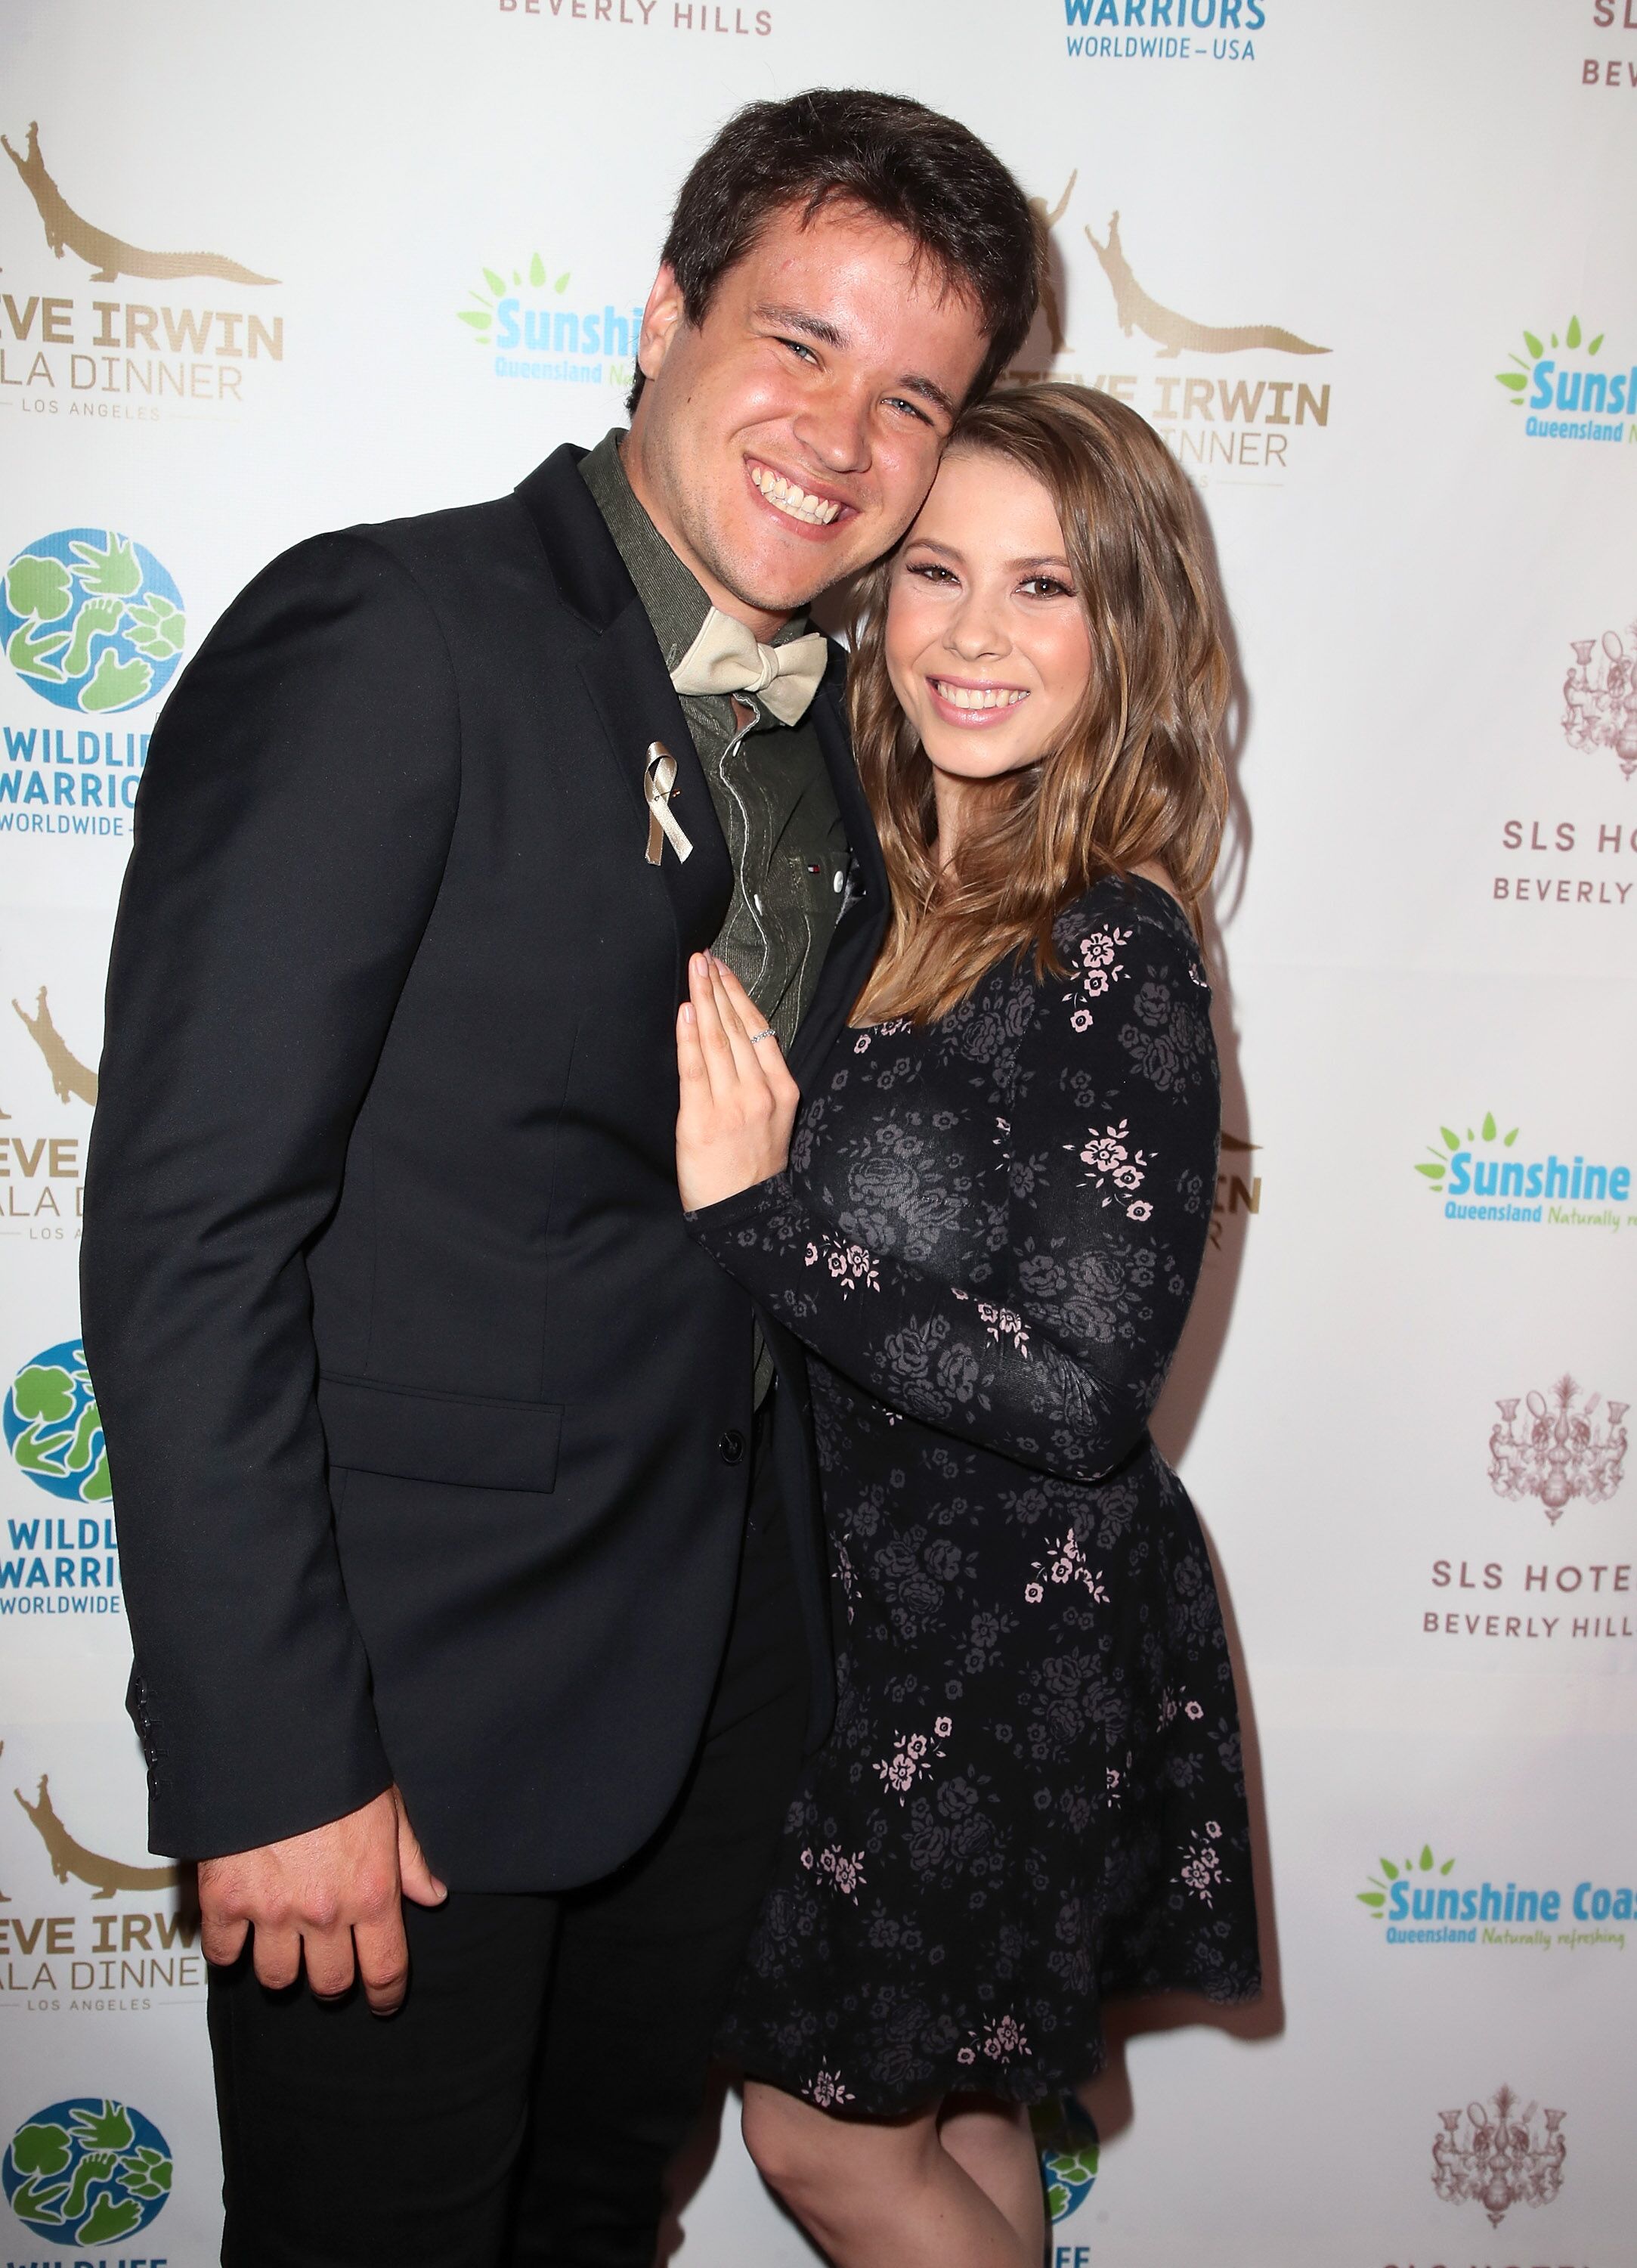 Wakeboarder Chandler Powell and conservationist/TV personality Bindi Irwin attend the Steve Irwin Gala Dinner 2018 at SLS Hotel on May 5, 2018 | Photo: Getty Images